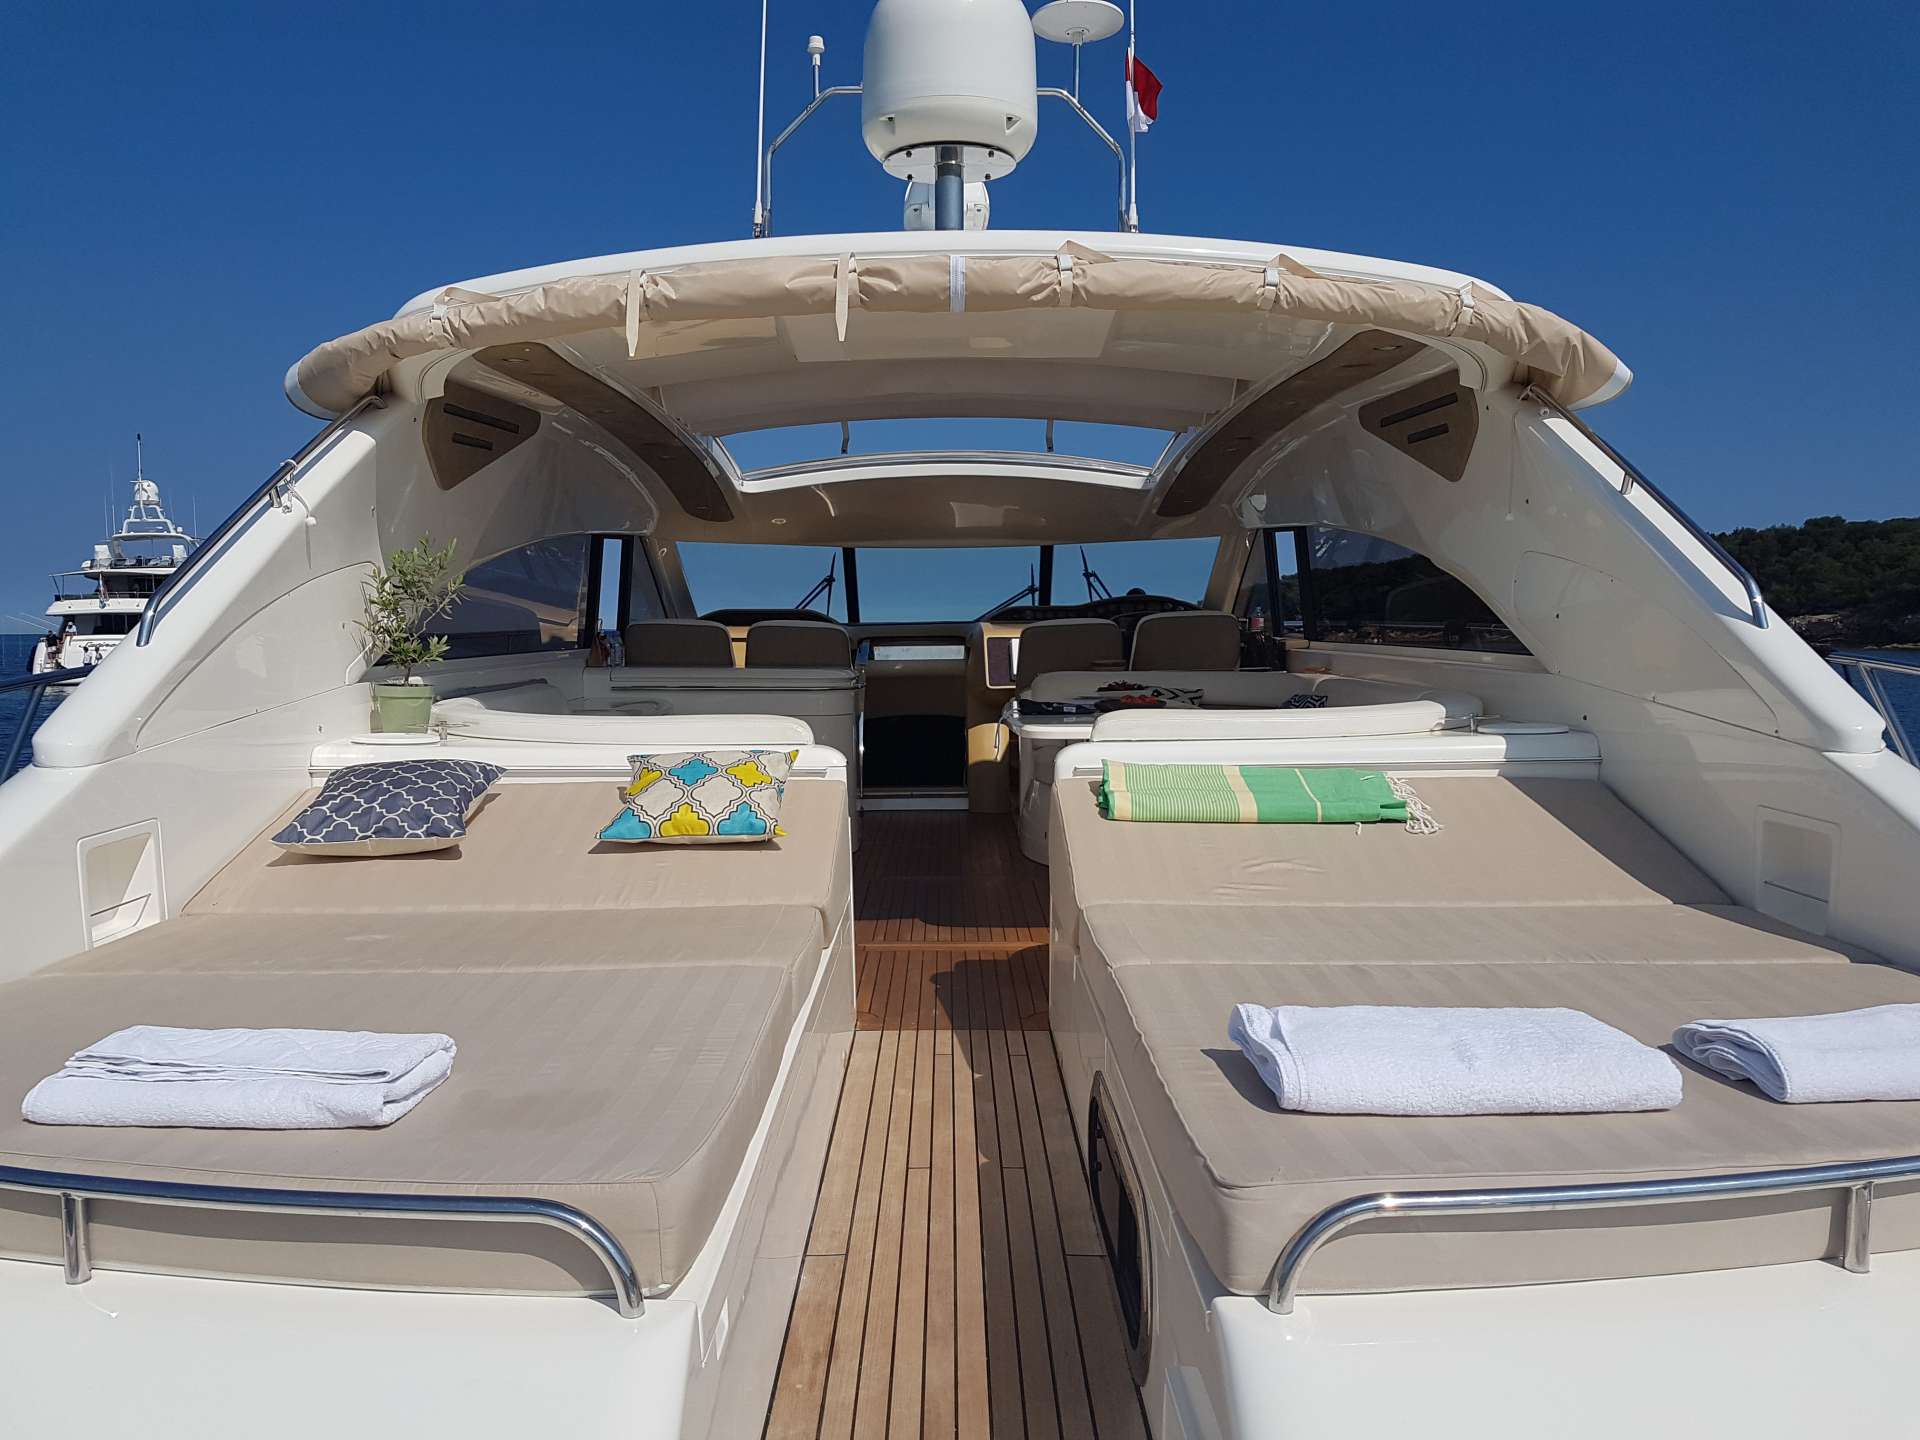 Princess V65 - Yacht Charter Cannes & Boat hire in France French Riviera Cannes Vieux port de Vallauris 2